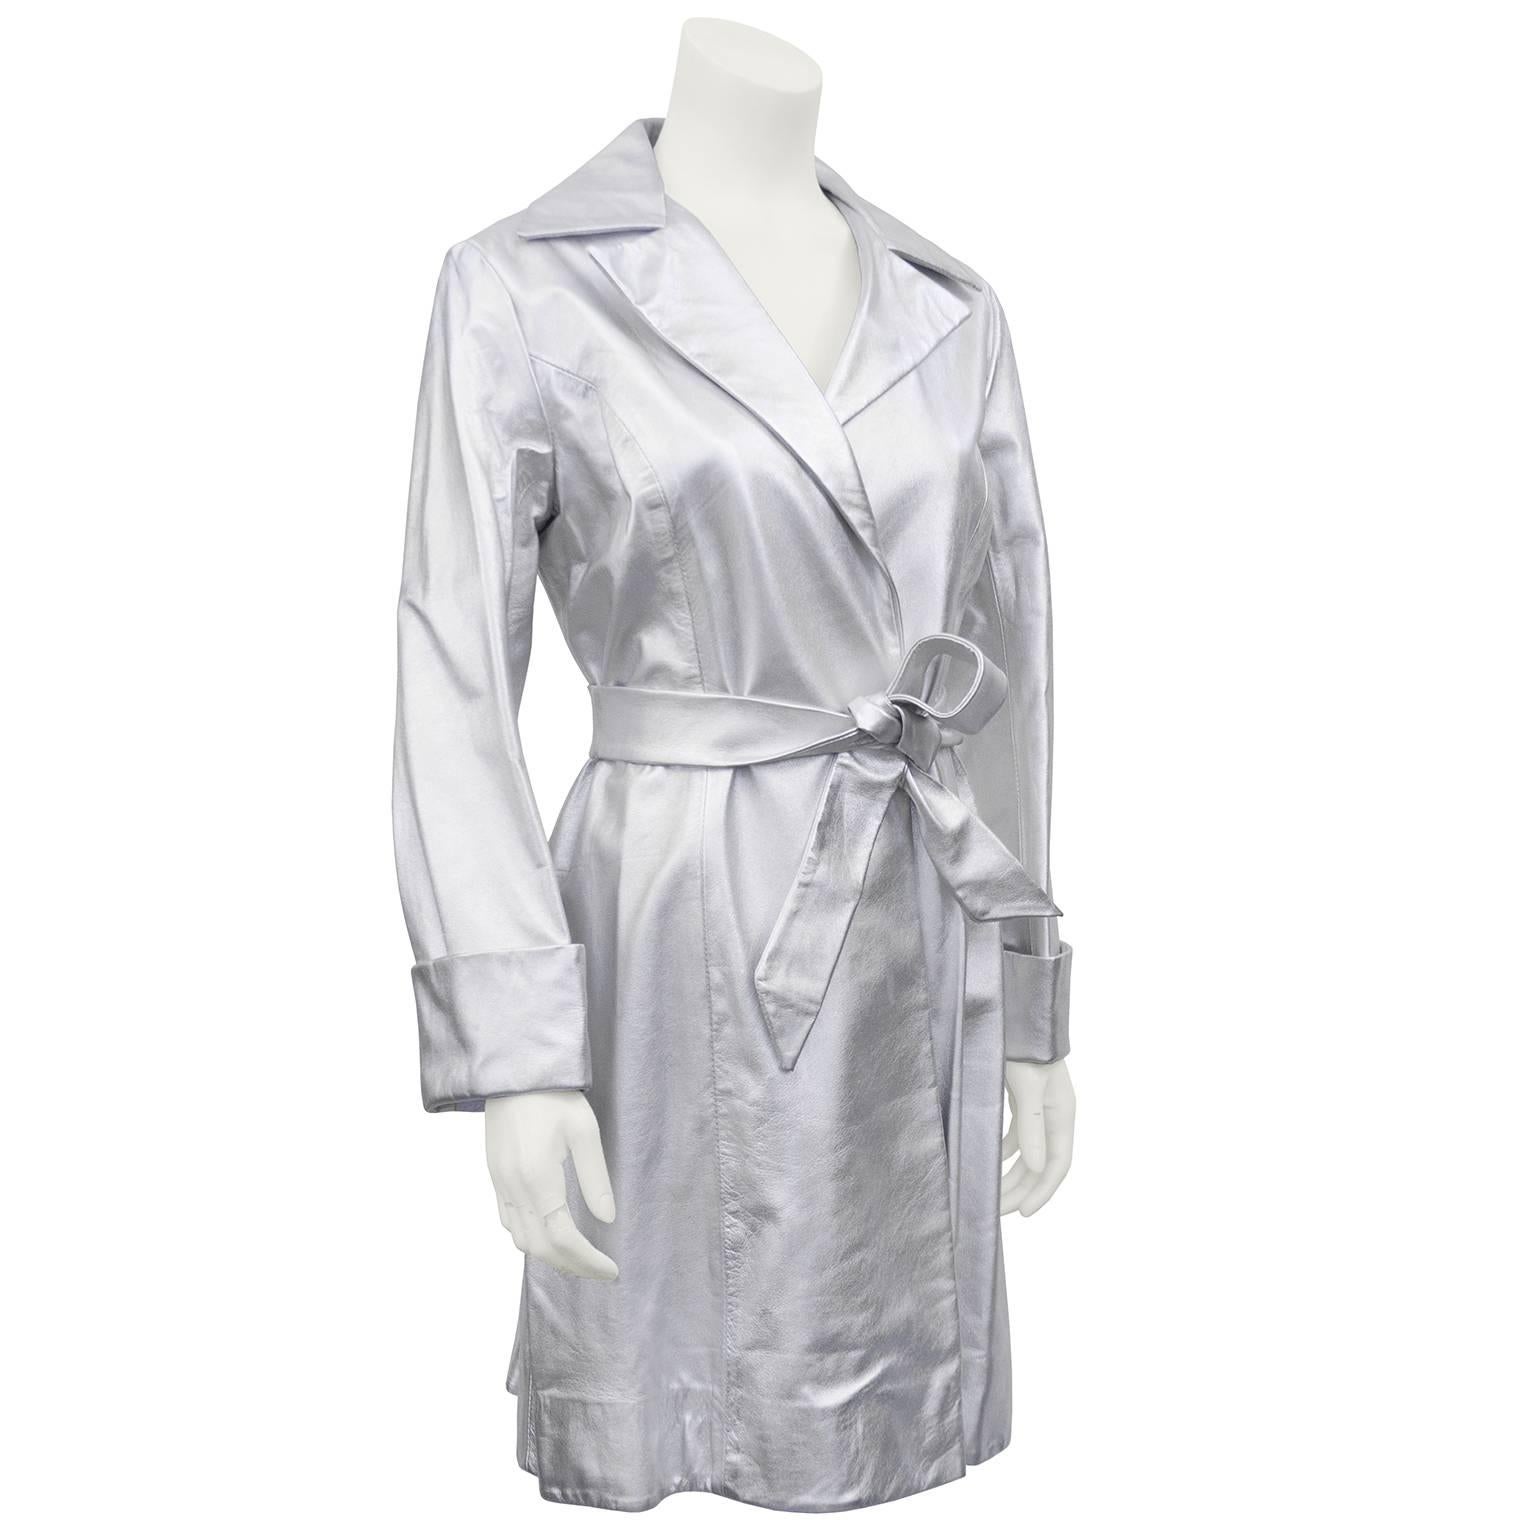 The perfect retro piece. Silver kid soft leather trench coat. Notched collar, cuffed sleeves, slight swing shape and a matching belt. Can be worn with or without belt. White polyester lining. No buttons. Excellent vintage condition,  very gently